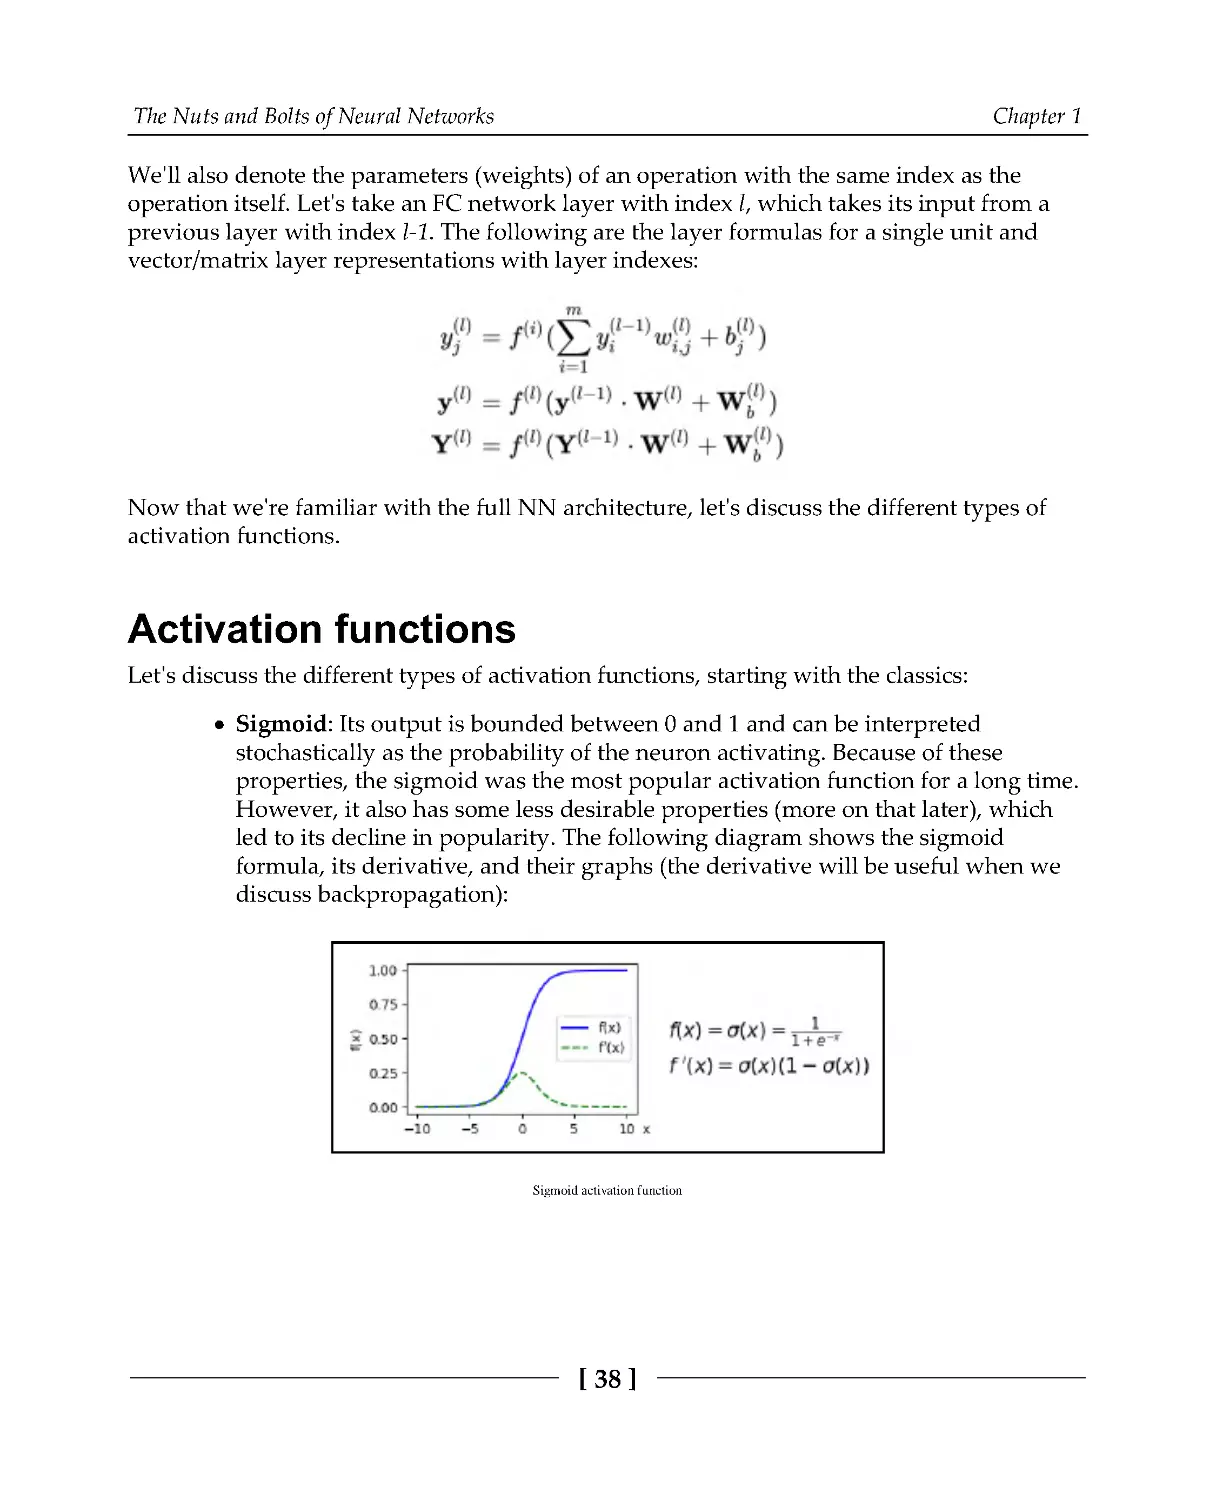 Activation functions